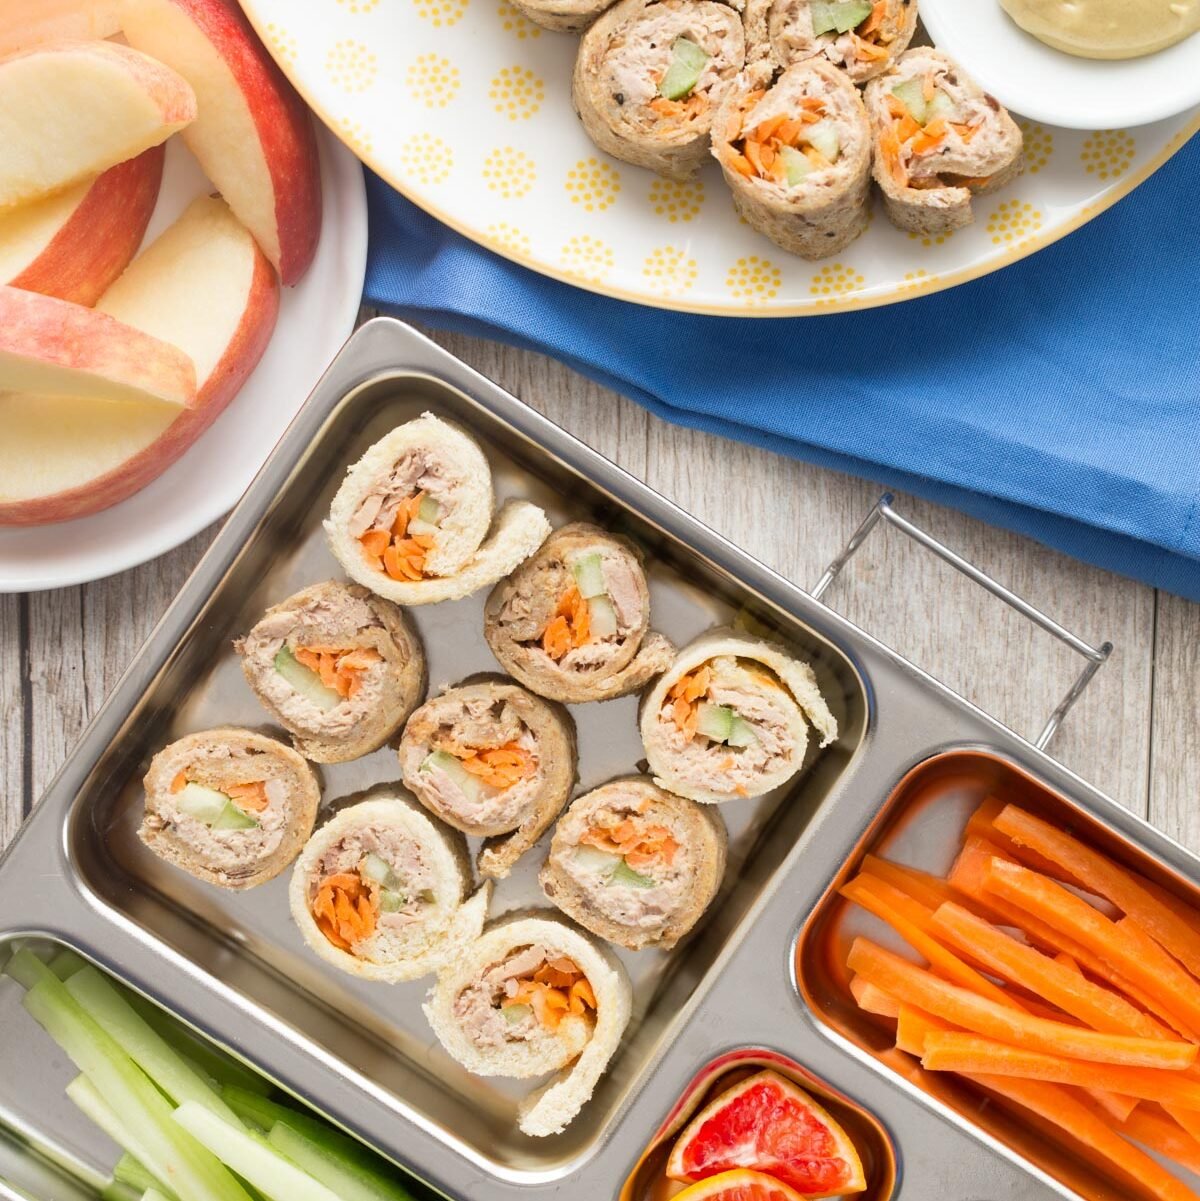 Bento Lunch Sandwich Sushi - Easy Peasy Meals